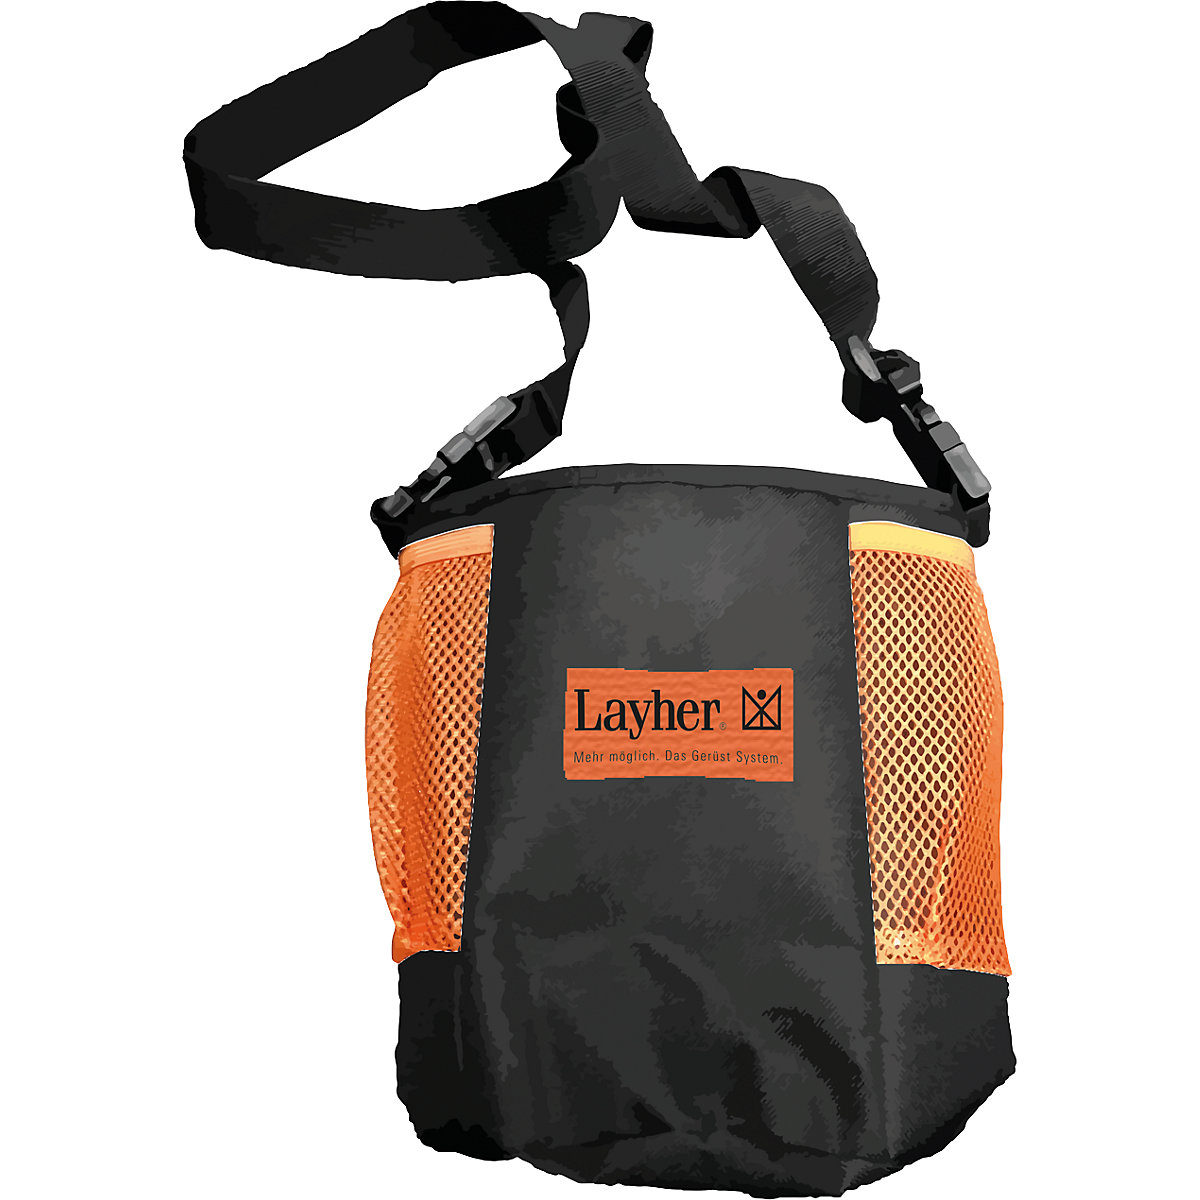 Assembly bag - Layher